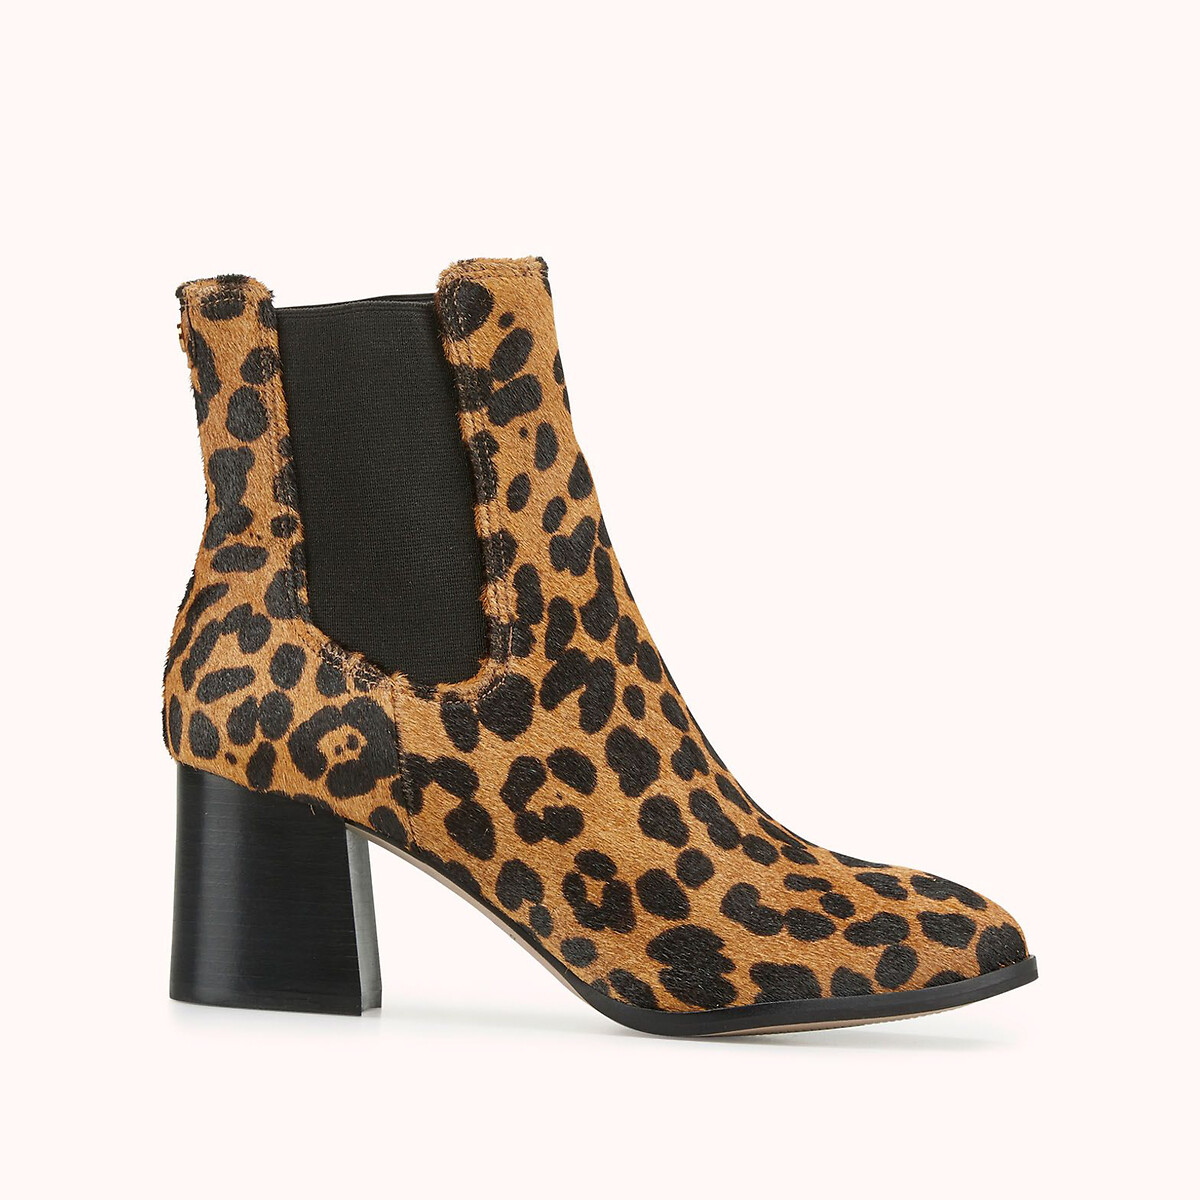 Lanae Suede Ankle Boots in Leopard Print